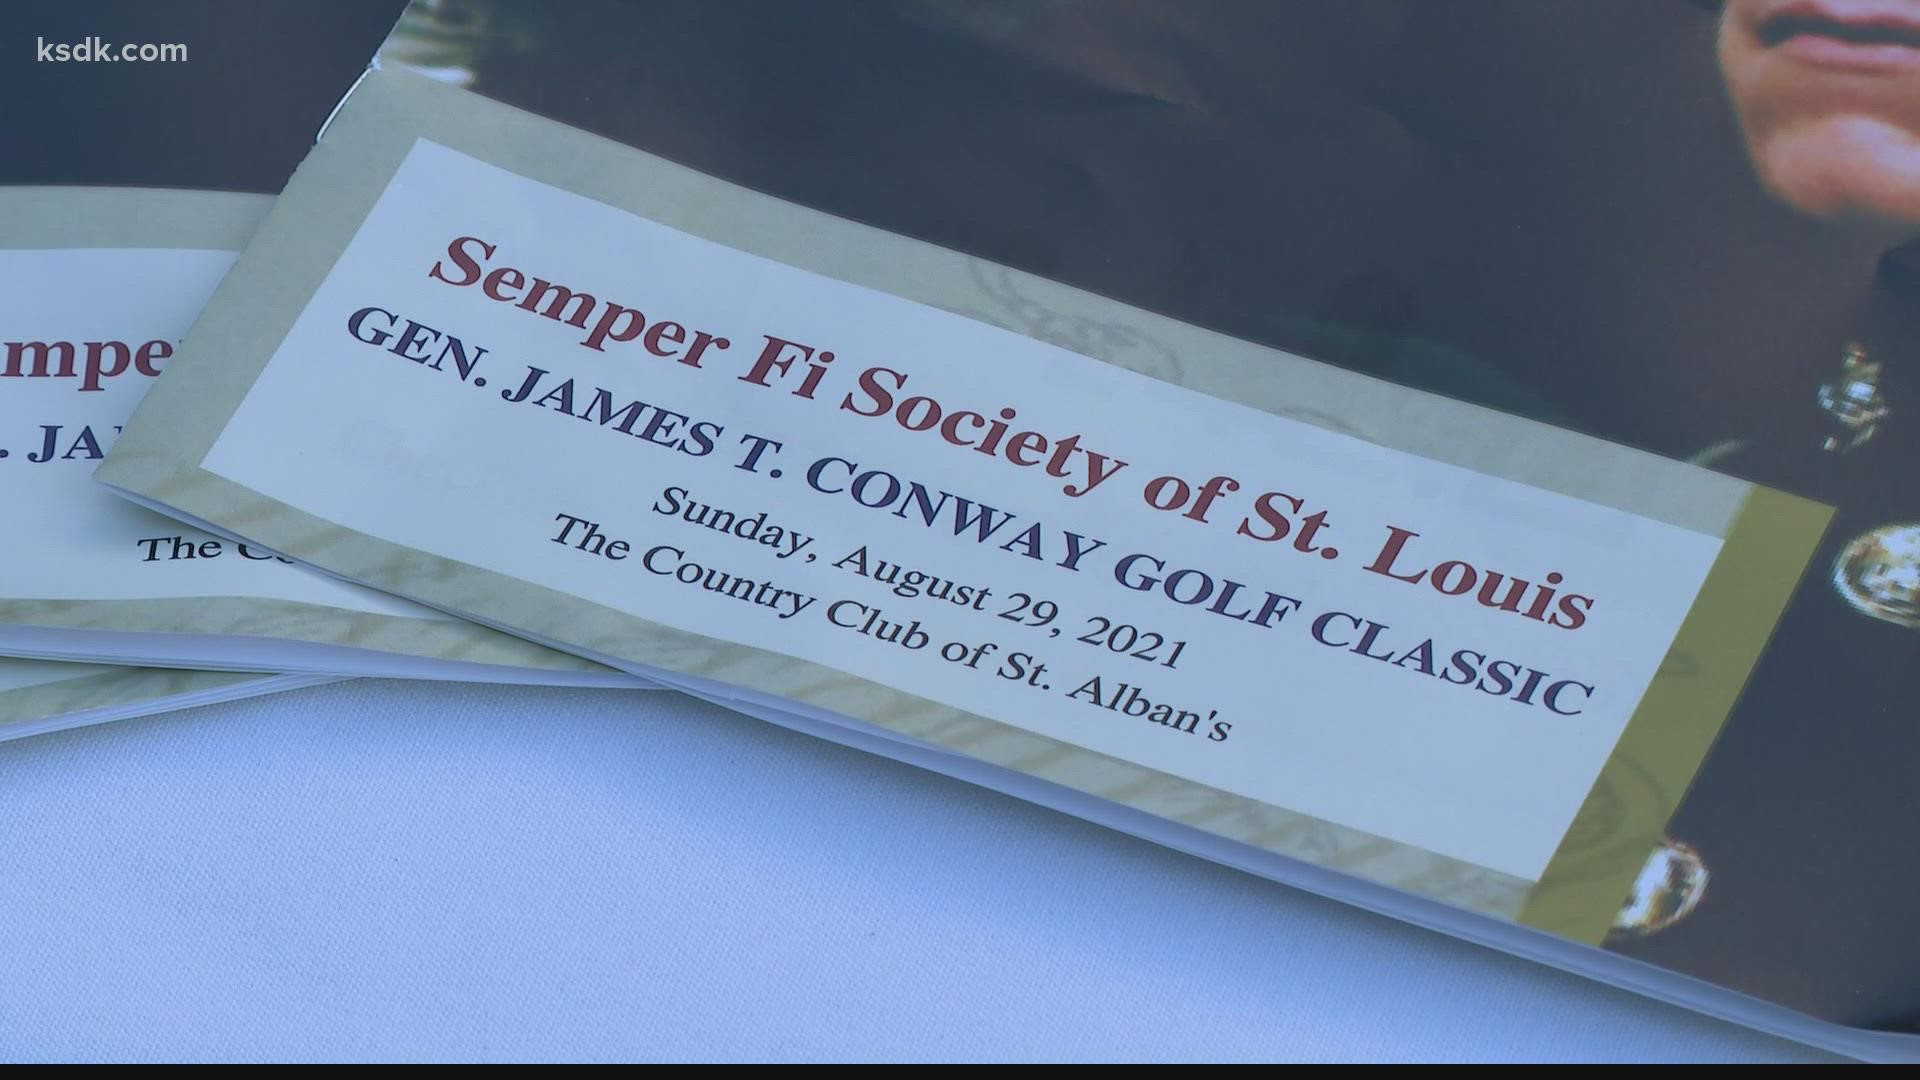 The Semper Fi Society hosted a gold tournament and auction to raise money for fallen and wounded heroes